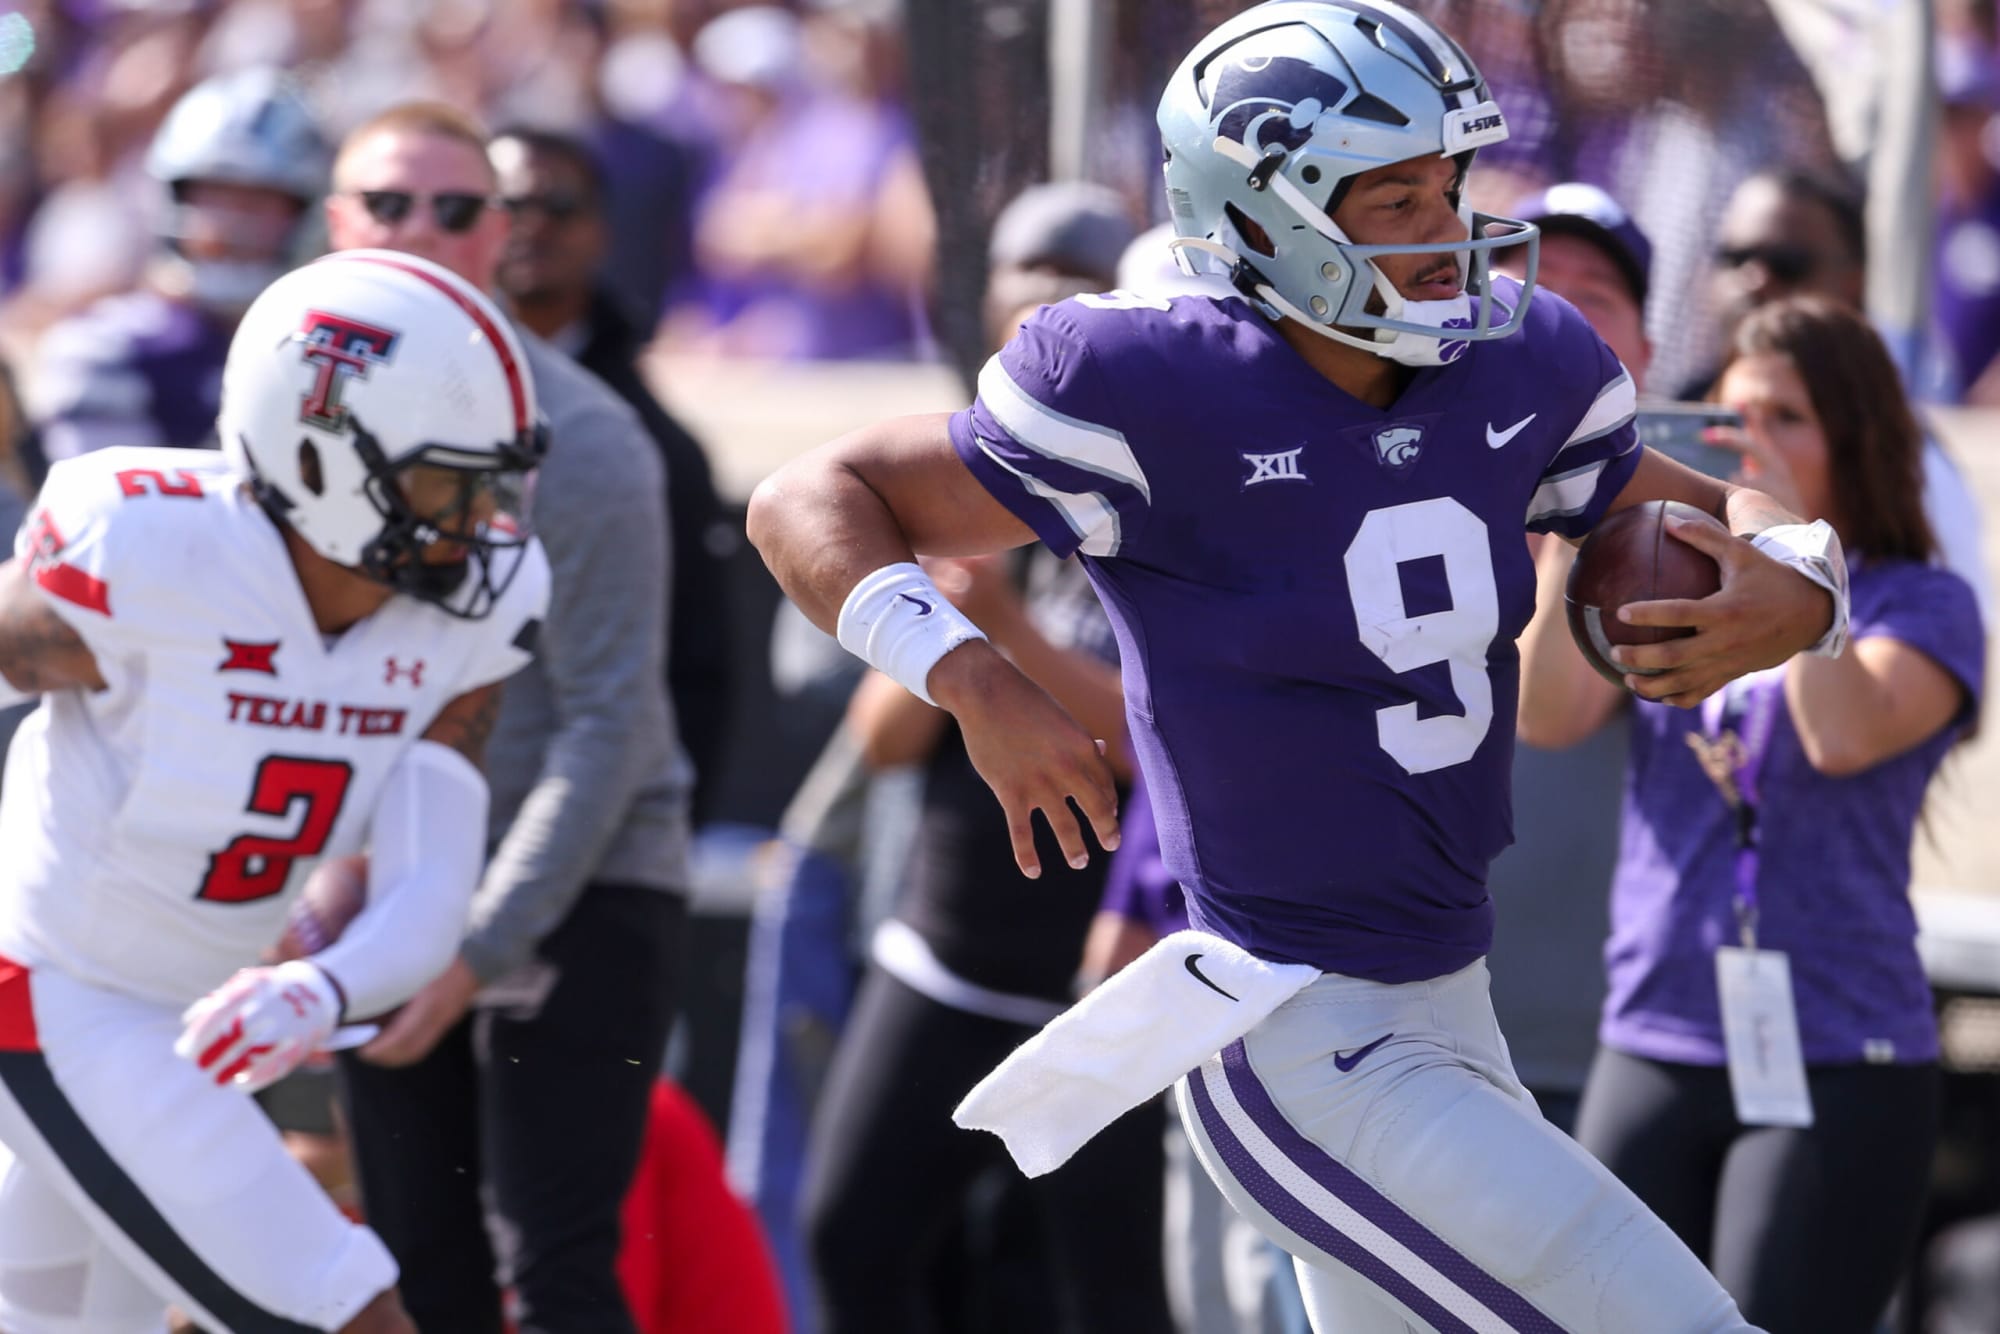 Texas Tech football: Why K-State has owned the Red Raiders lately